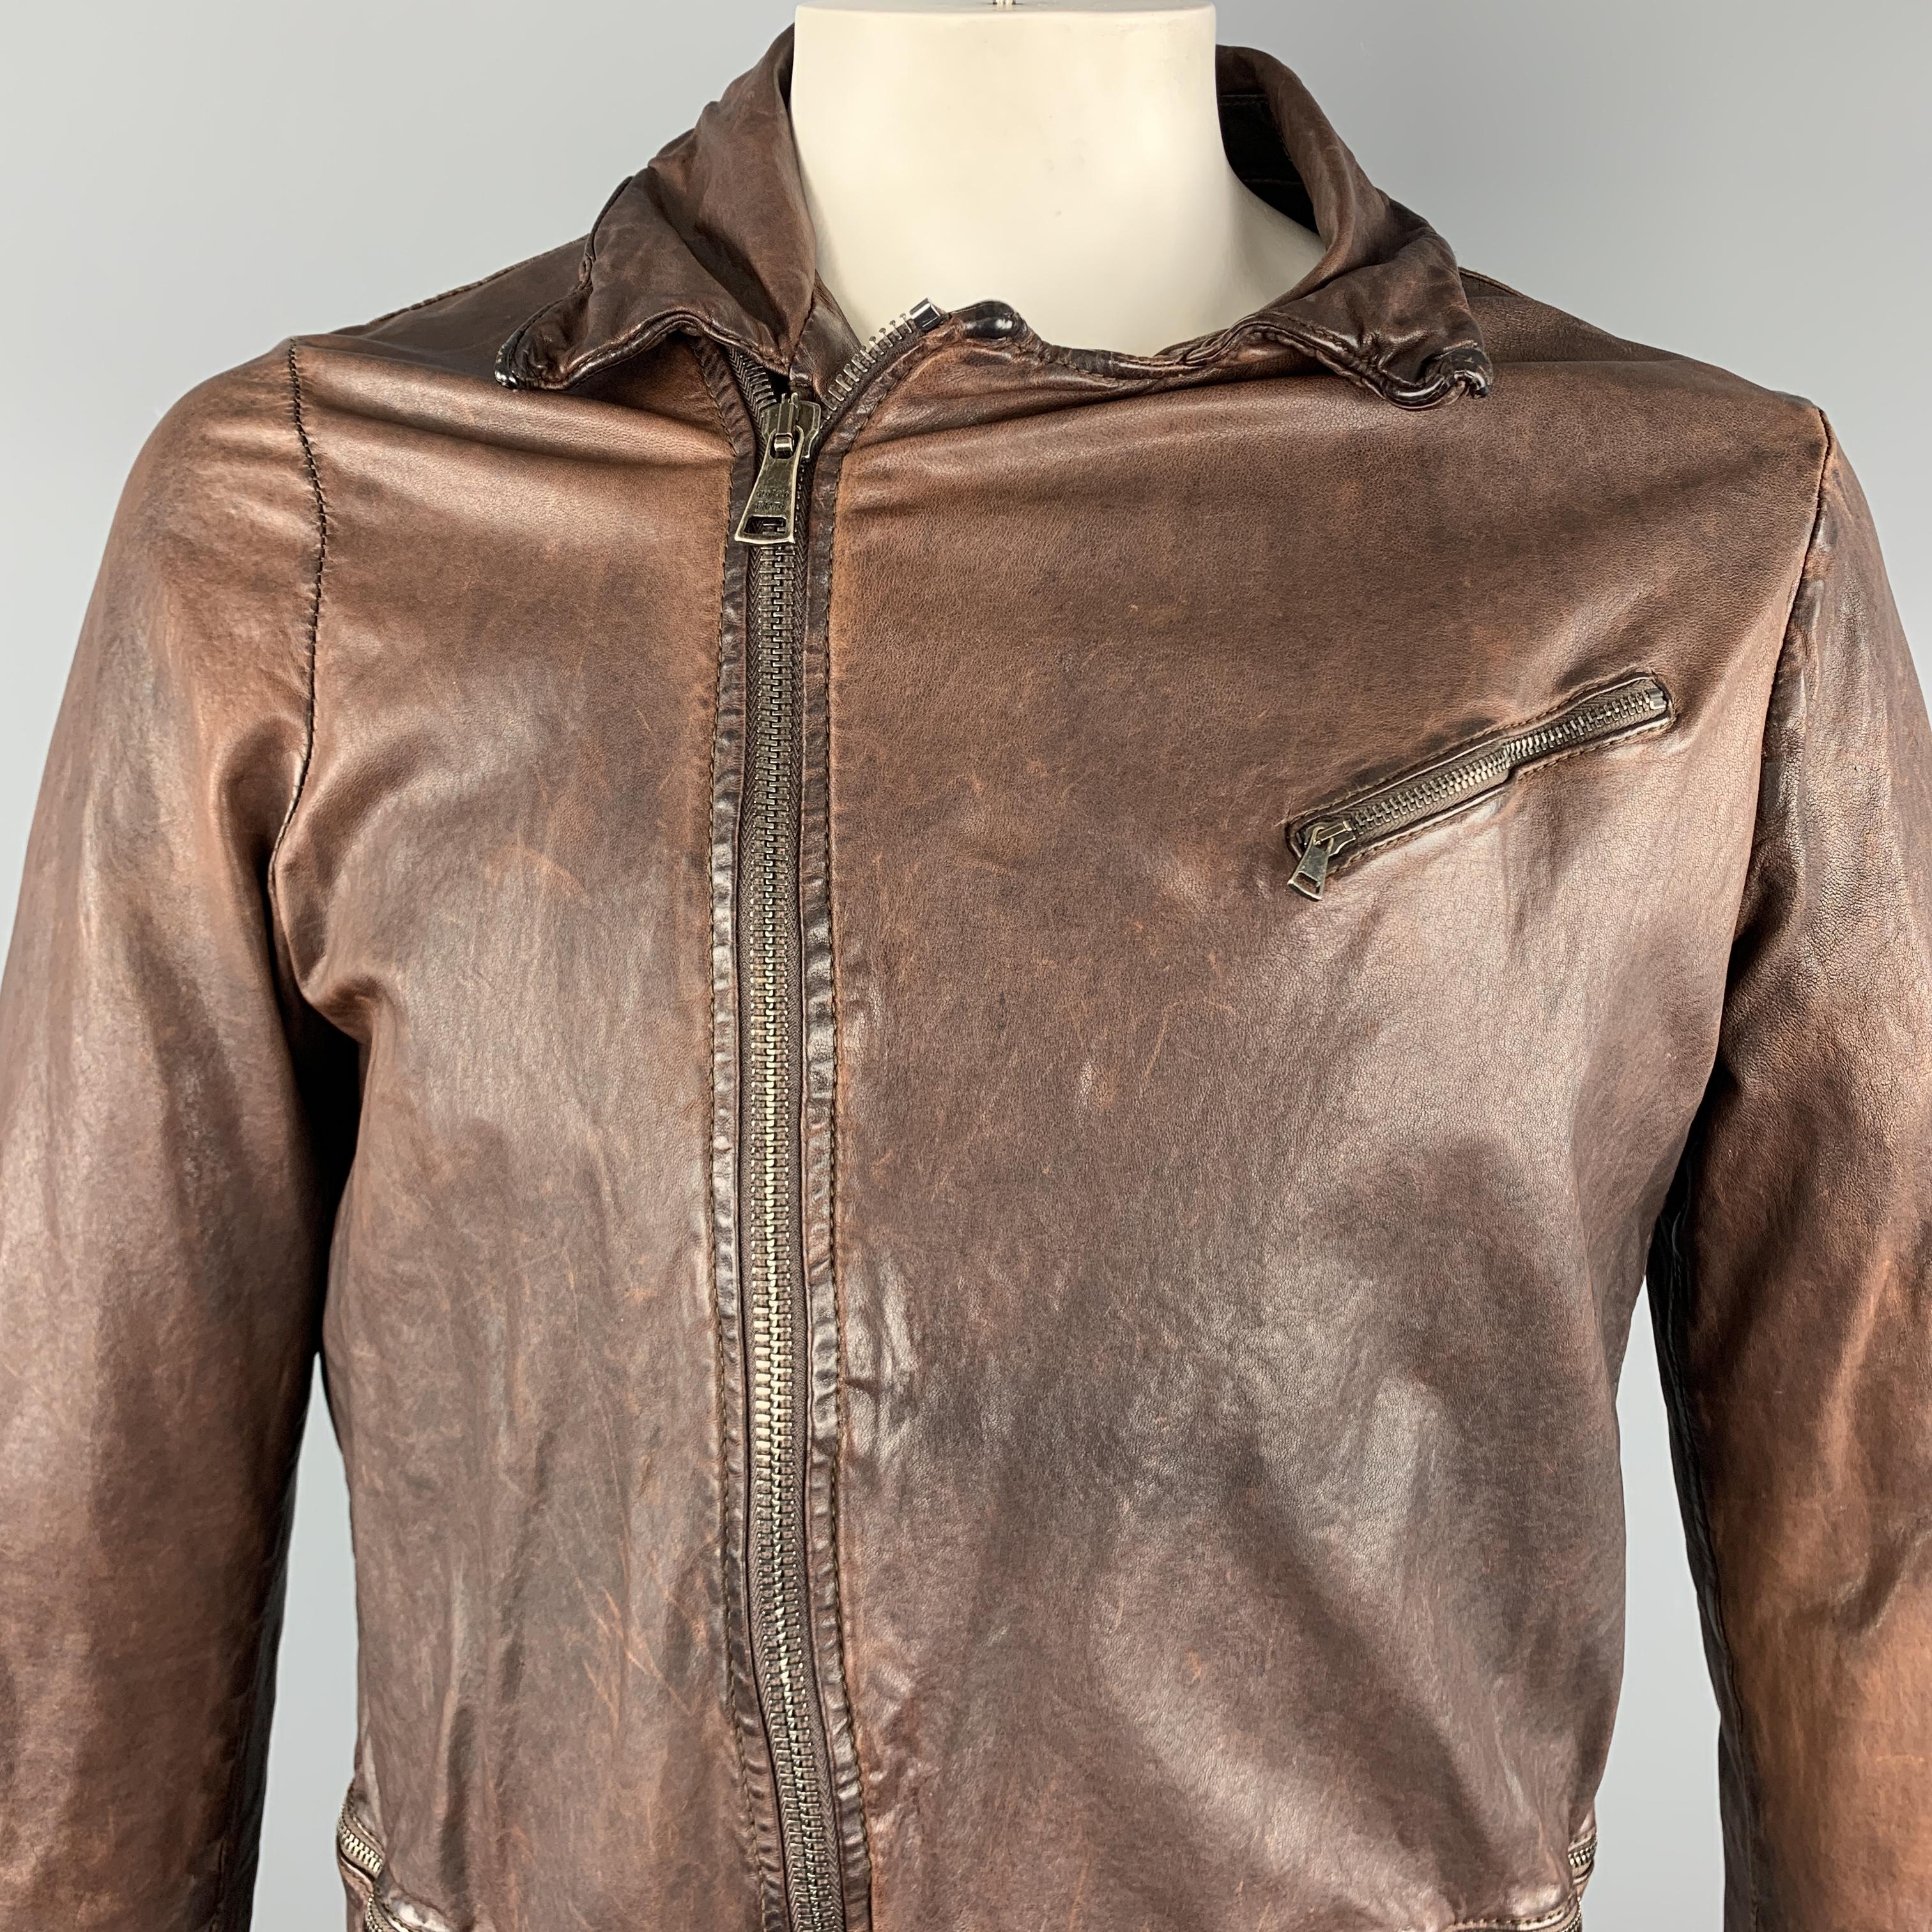 GIORGIO BRATO jacket comes in a brown wrinkled leather featuring zip cuff, zipper pockets, and a full zip closure. Made in Italy.

Very Good Pre-Owned Condition.
Marked: 50

Measurements:

Shoulder: 16.5 in. 
Chest: 44 in. 
Sleeve: 27 in. 
Length: